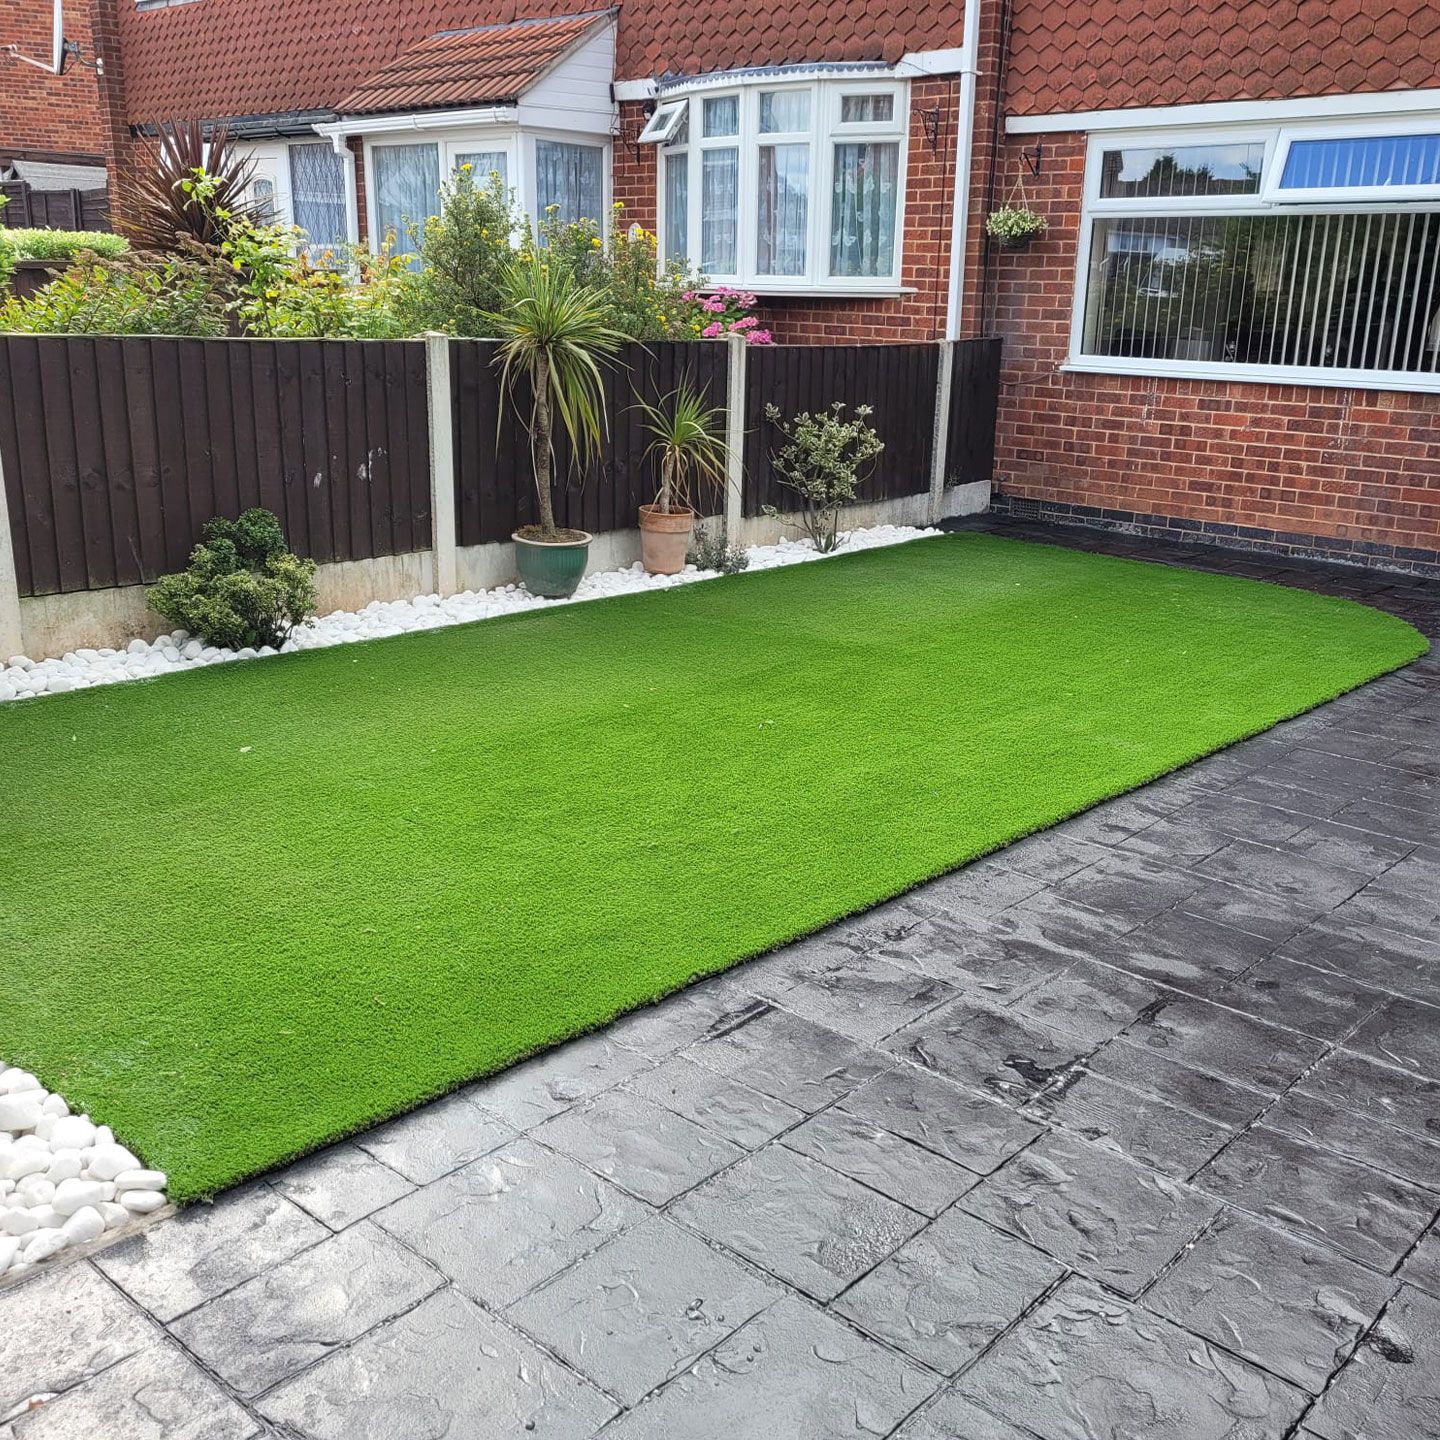 landscaping in binley woods showing new artificial grass and patterned concrete paving